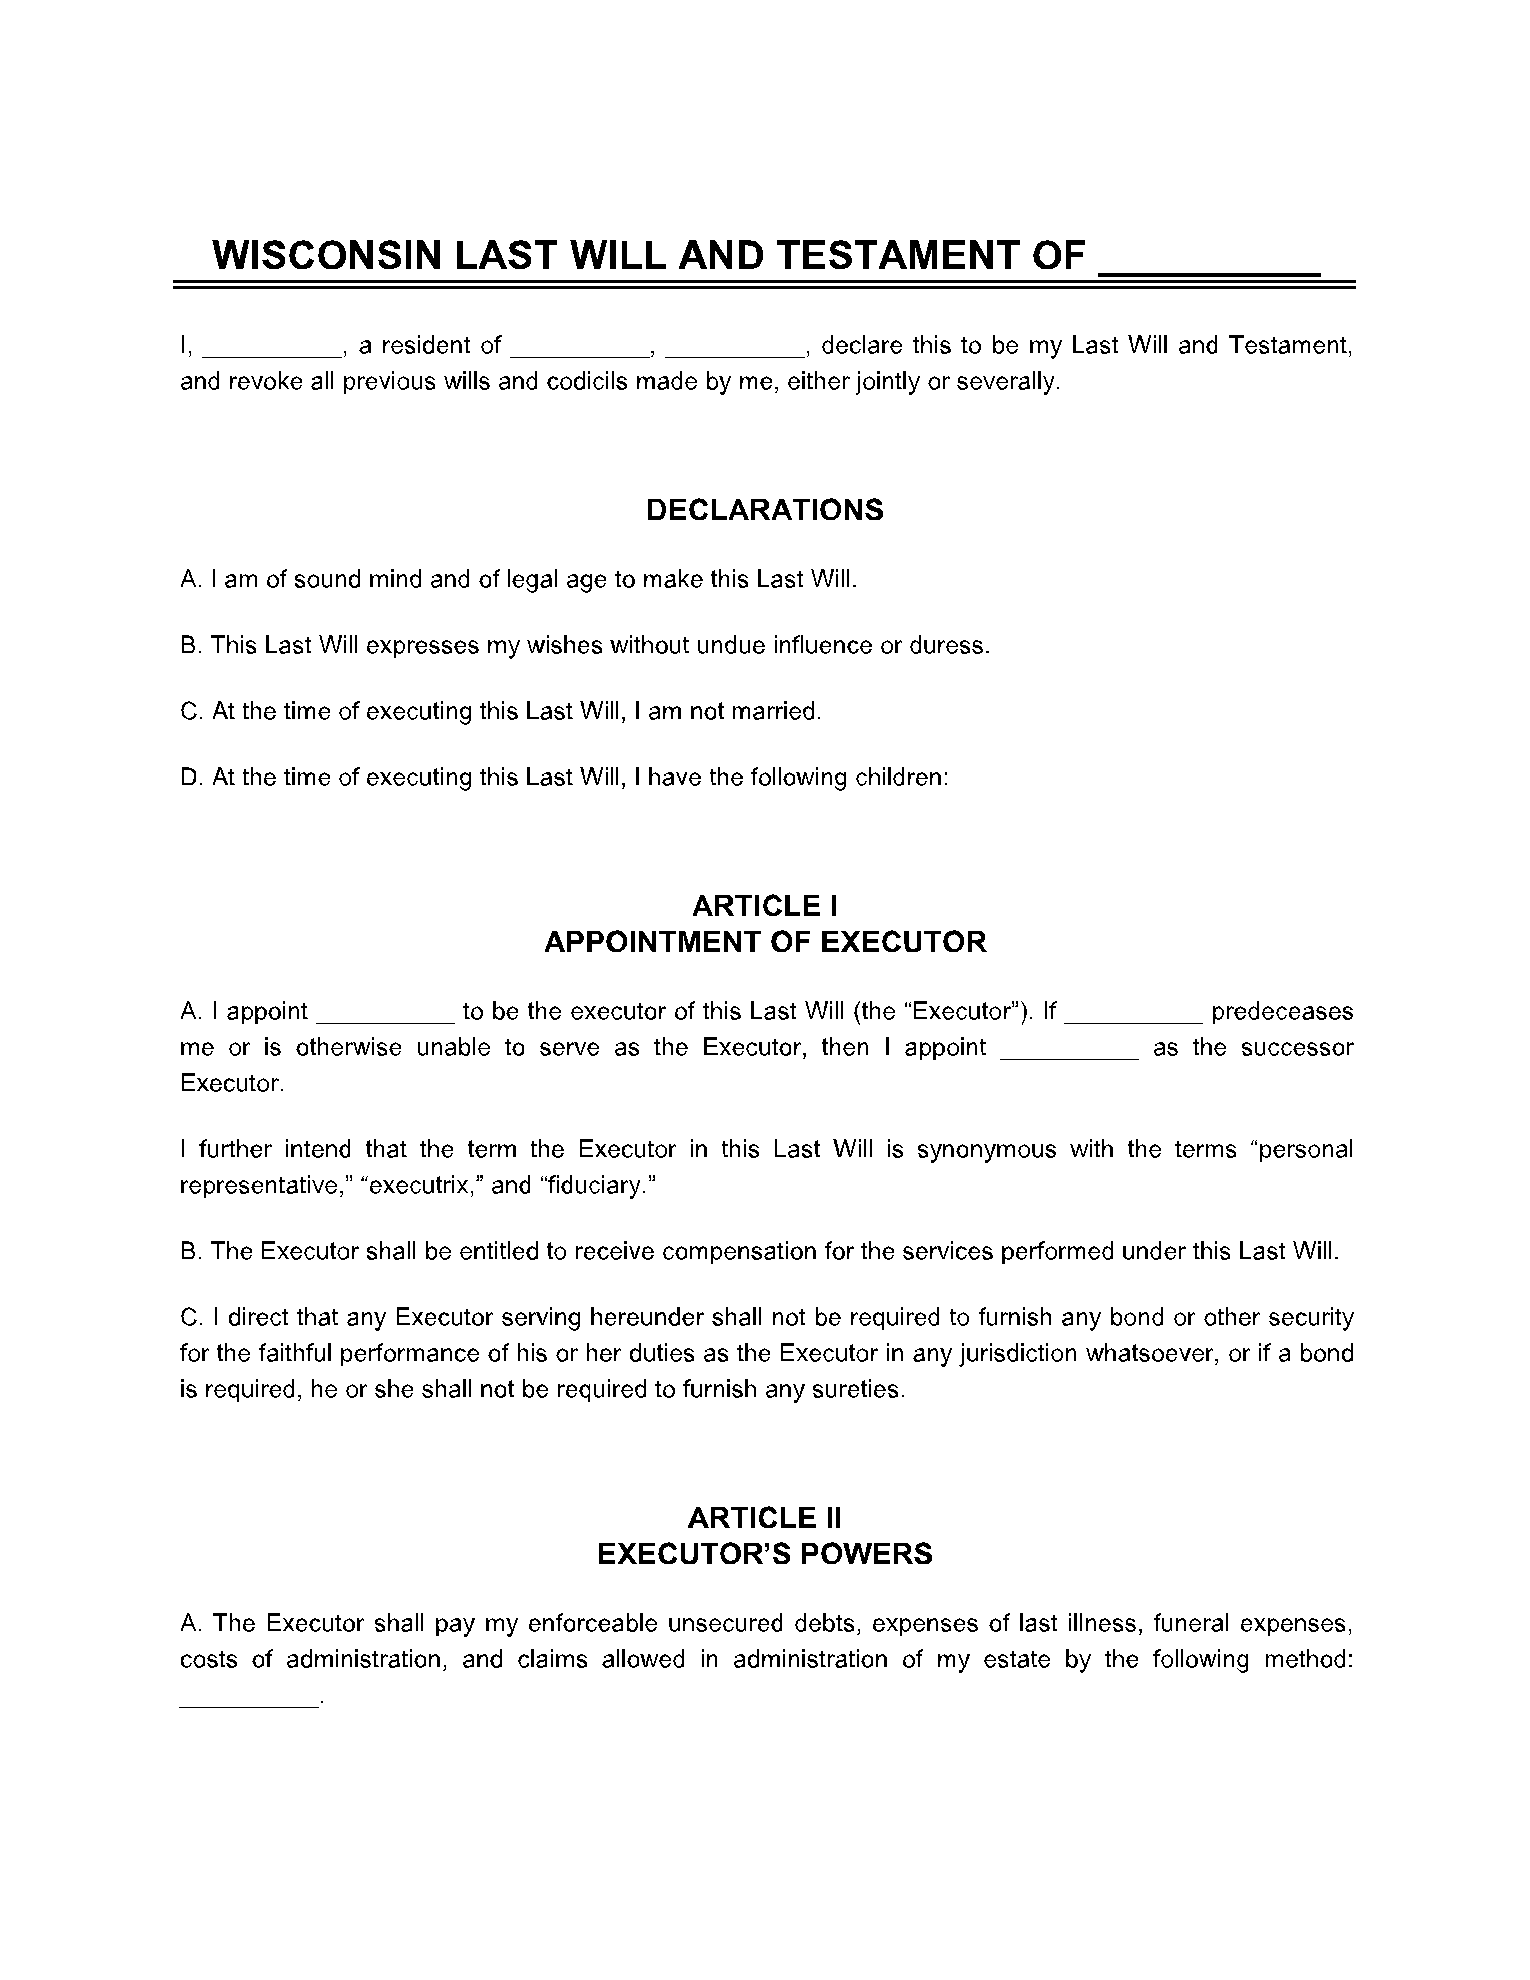 Wisconsin Last Will and Testament Templates